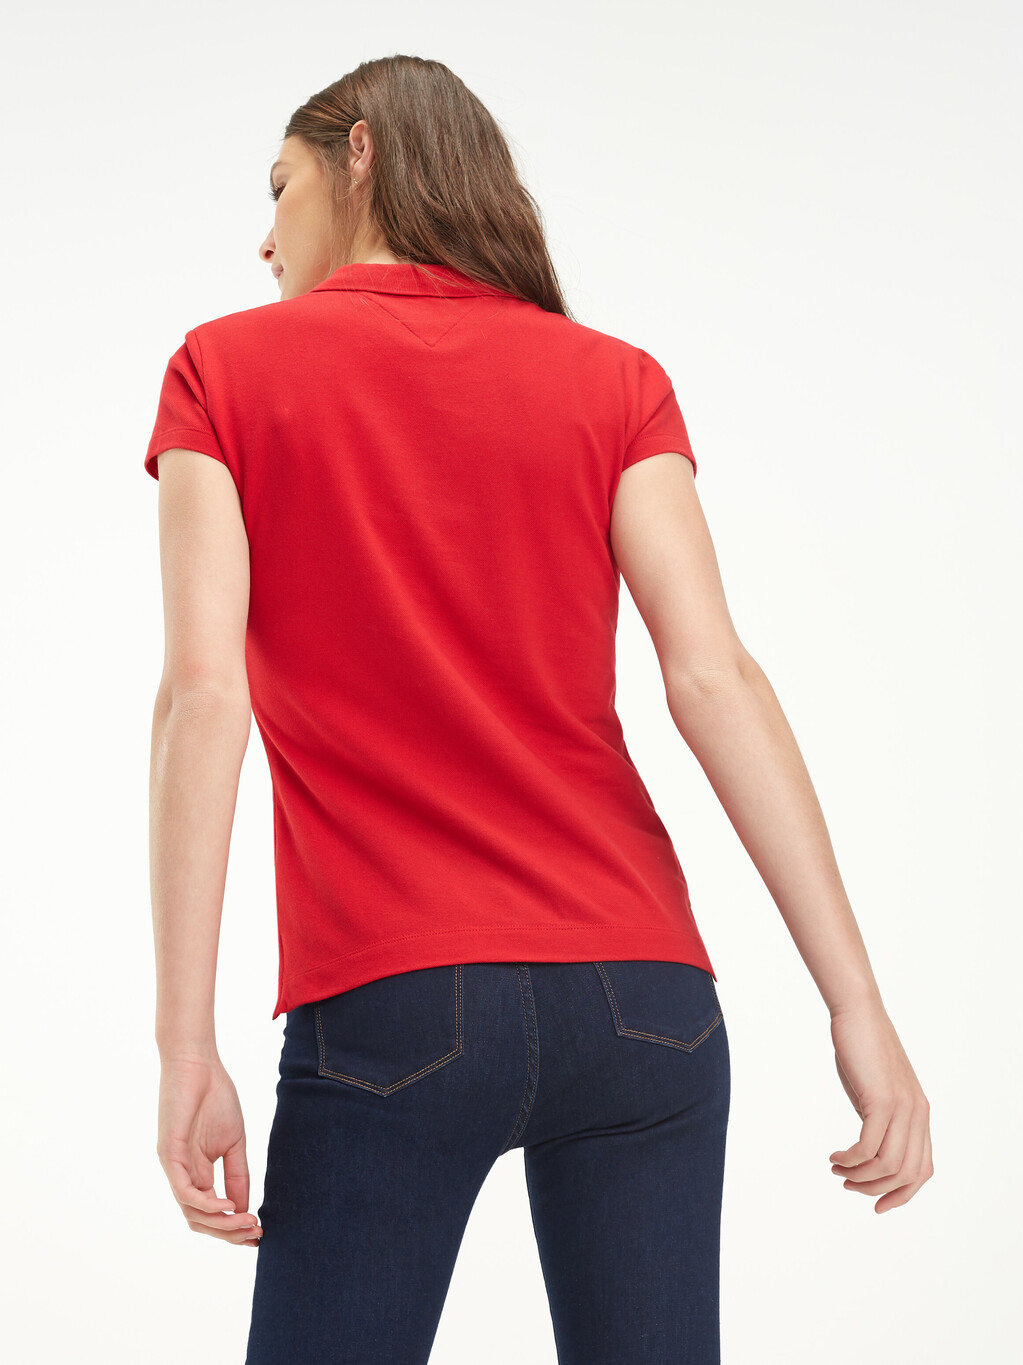 Heritage Slim Fit Polo Shirt, APPLE RED, hi-res